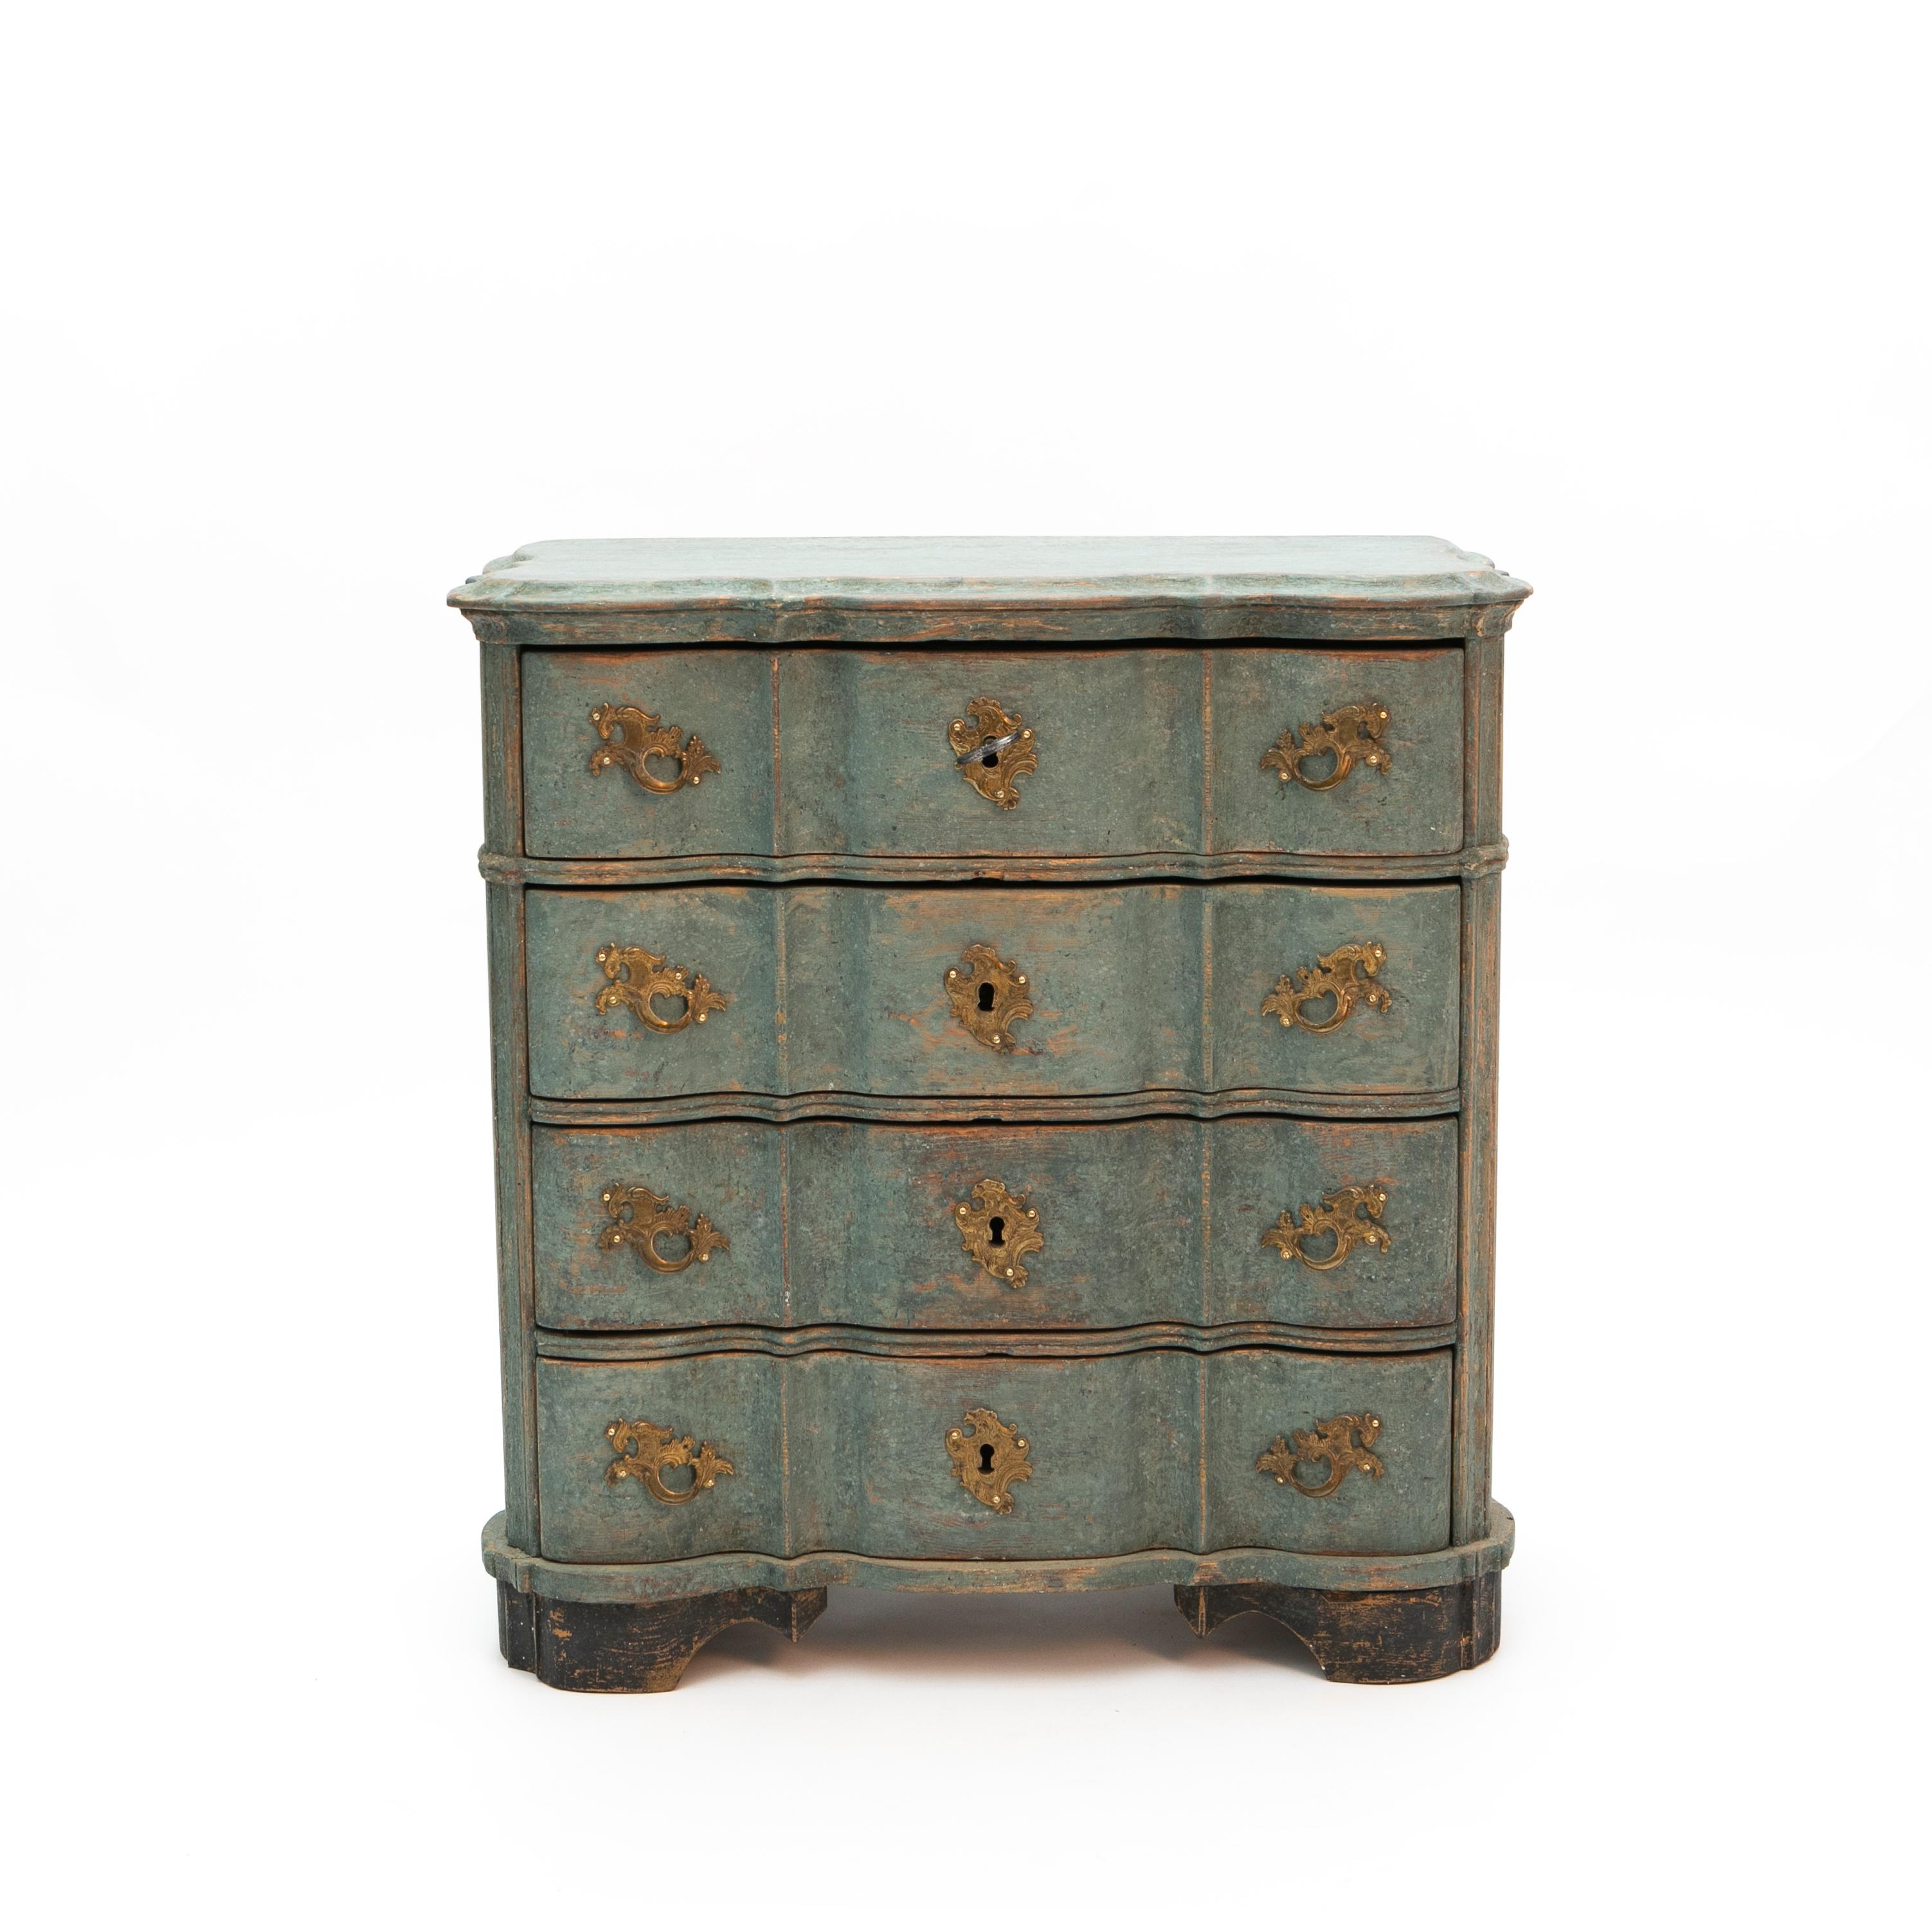 Danish baroque period 4 drawers chest scraped, to reveal layers of its original light blue paint and wonderful patina.
Moulded edge top above a front with beautifully carved serpentine drawers with original locks and key. Fitted with carrying